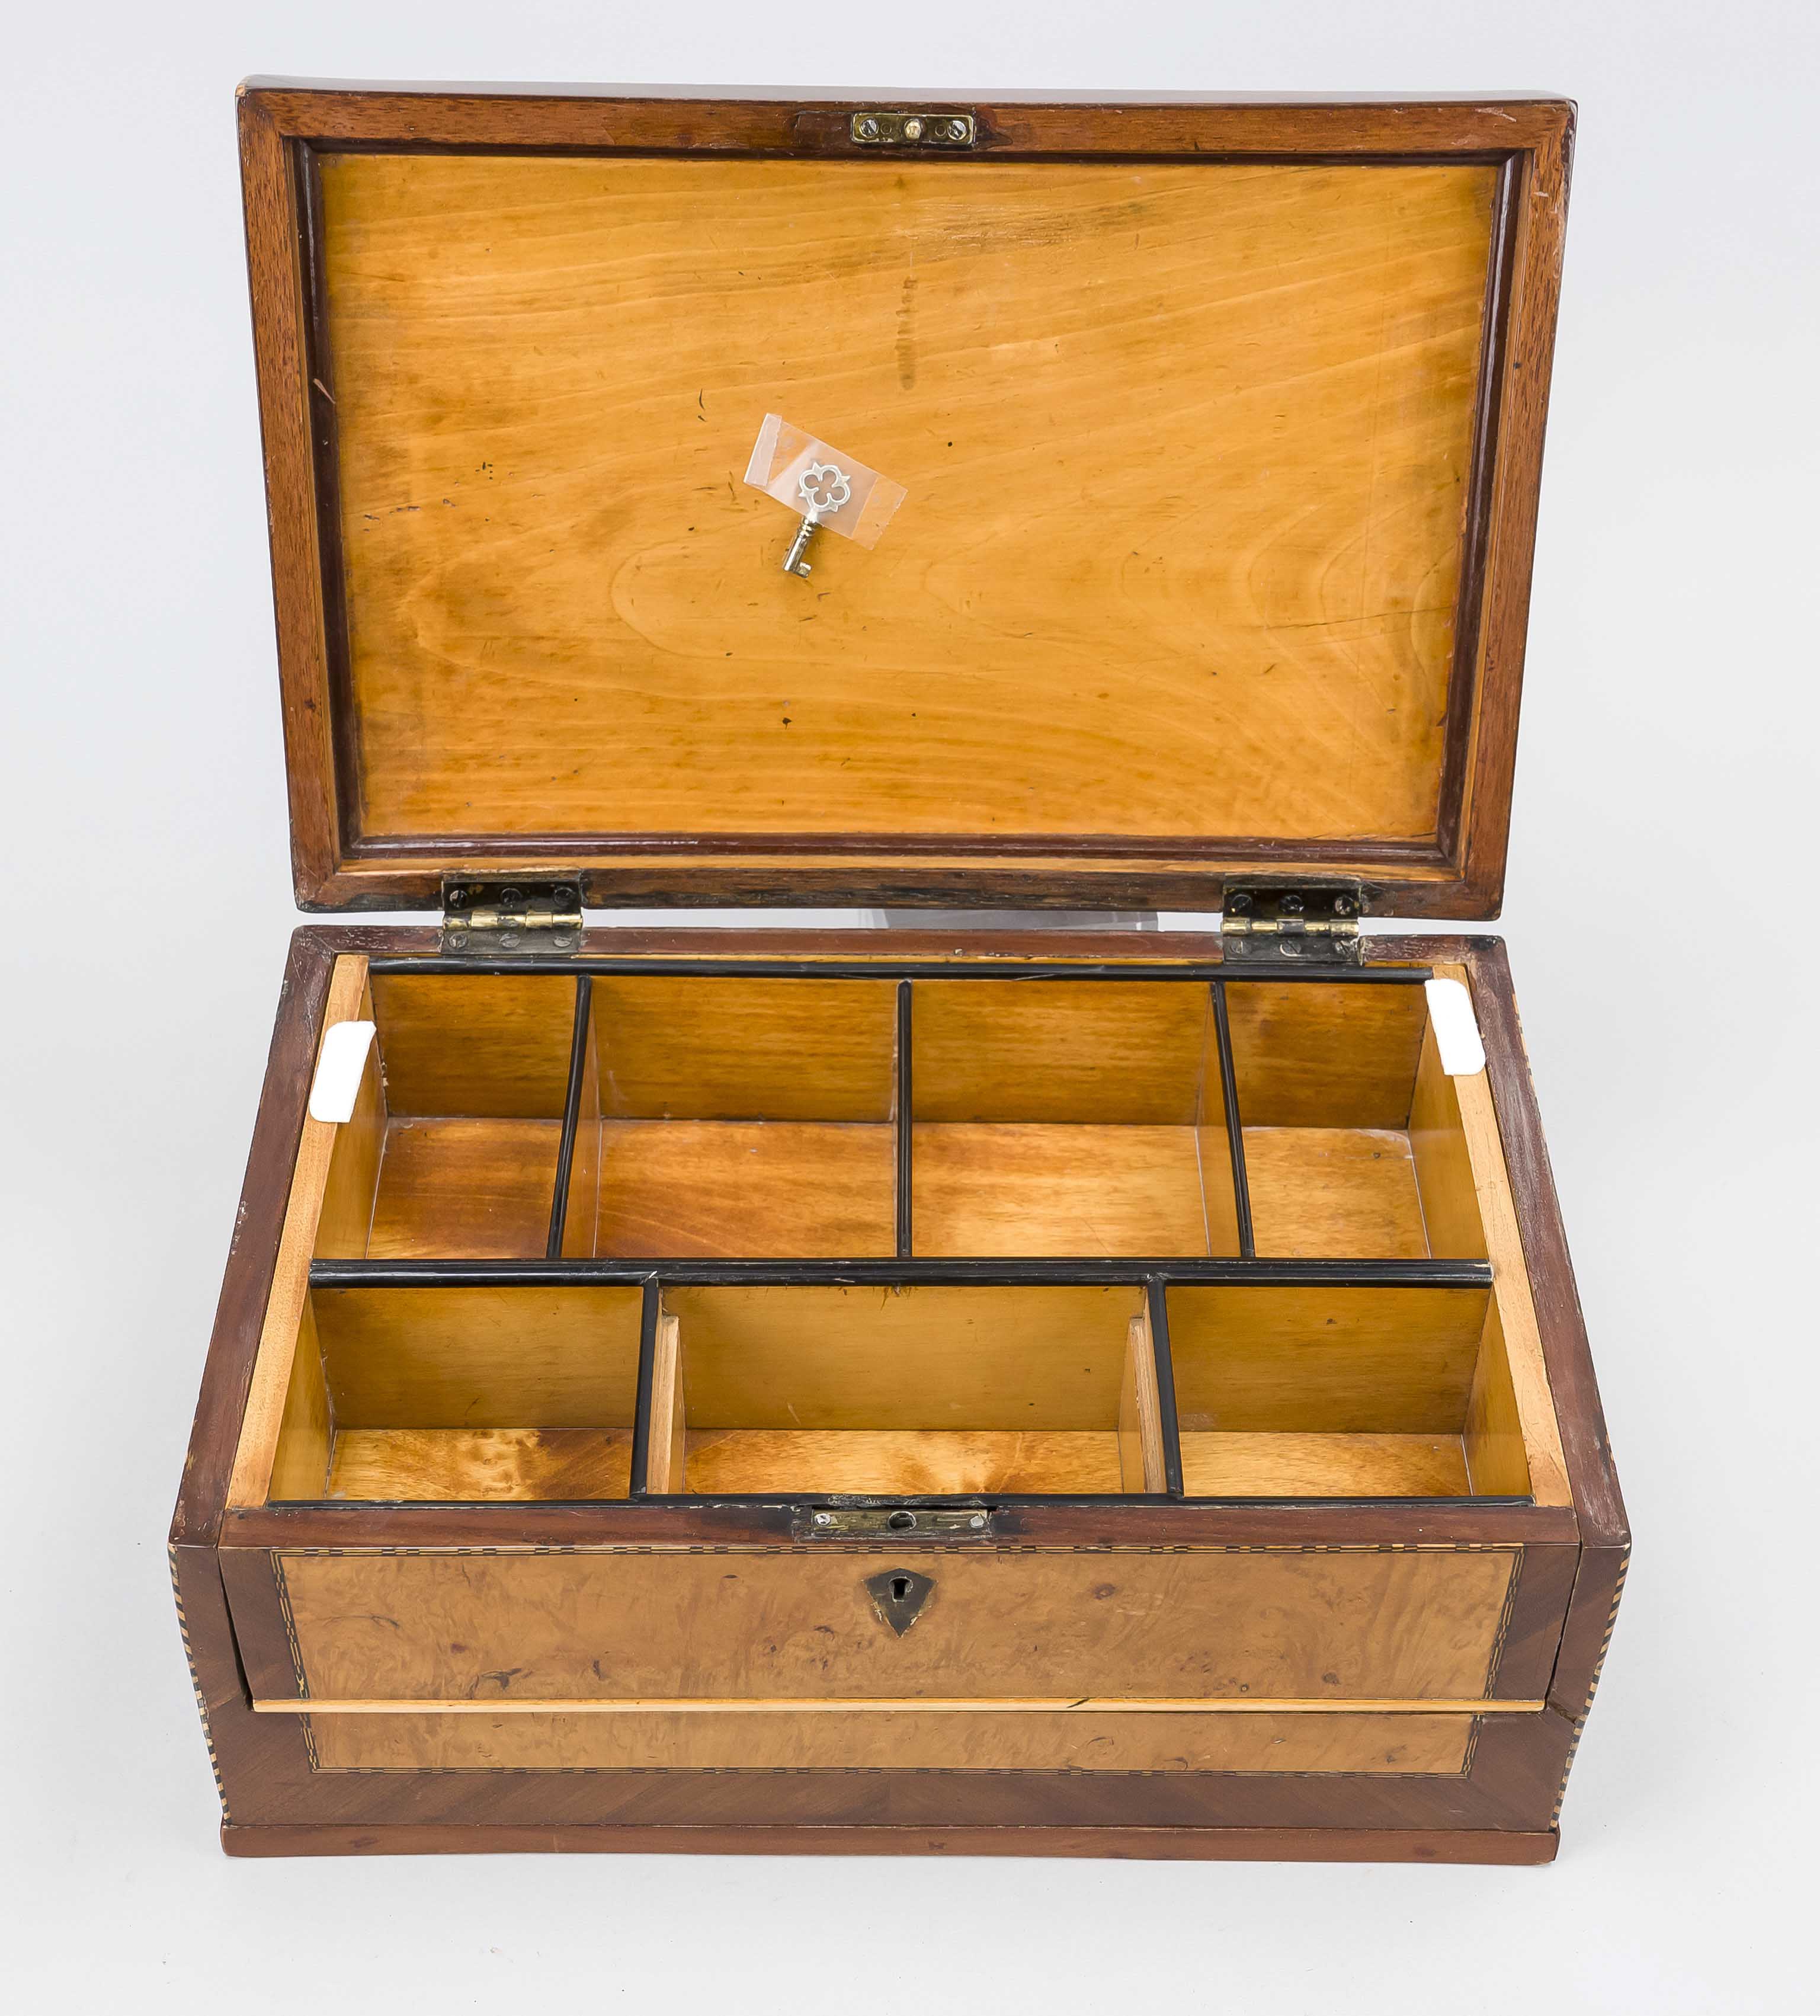 Wooden box with drawer, 19th century, birch body, veneered on all sides with bird's-eye maple and - Image 2 of 2